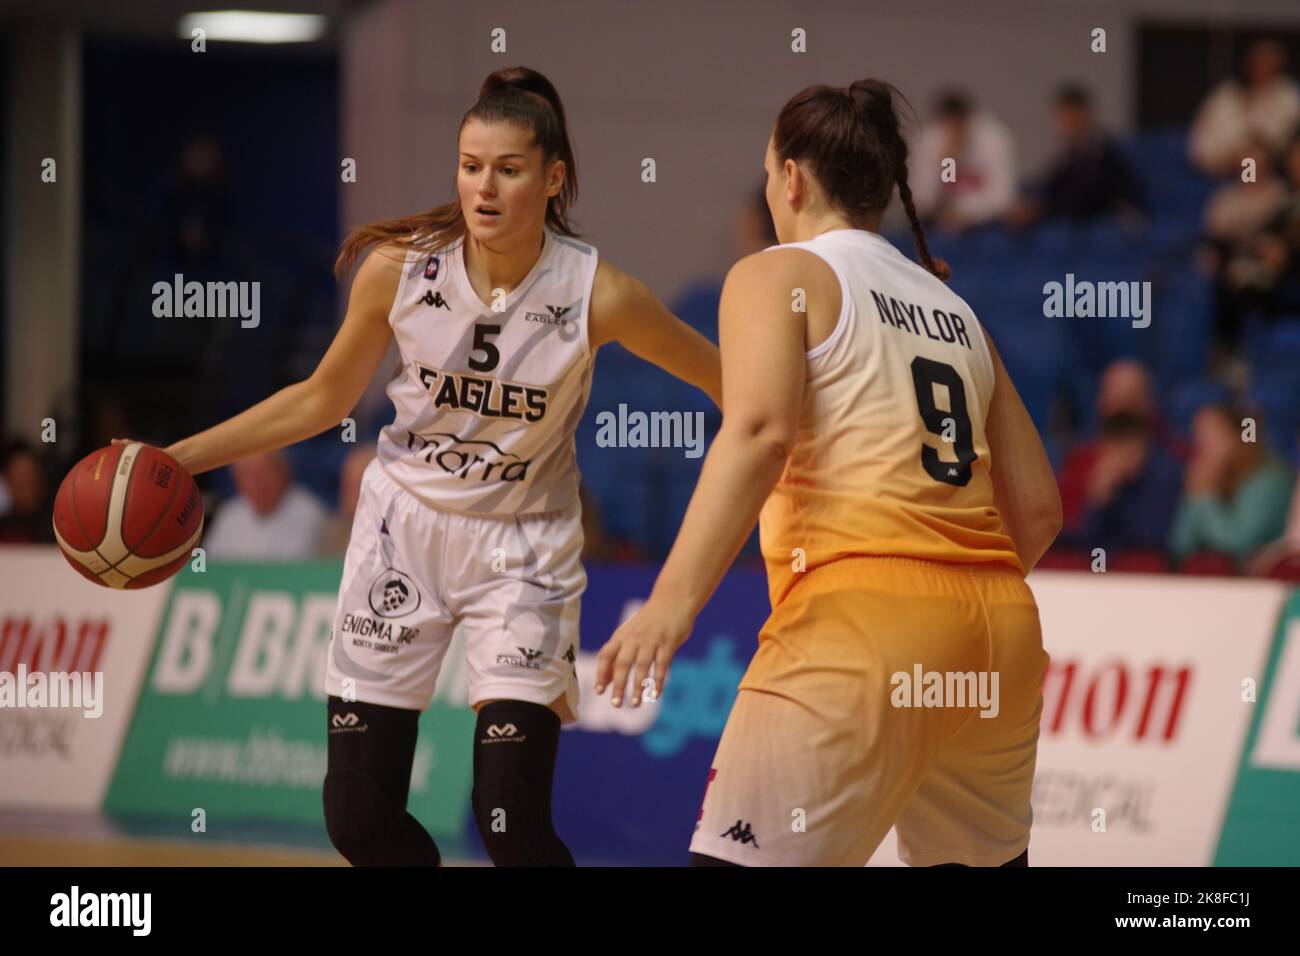 Sheffield, England, 23 October 2022. Marina Fernandez Pardo playing for Newcastle Eagles against Sheffield Hatters in a WBBL match at Ponds Forge. Credit: Colin Edwards/Alamy Live News. Stock Photo